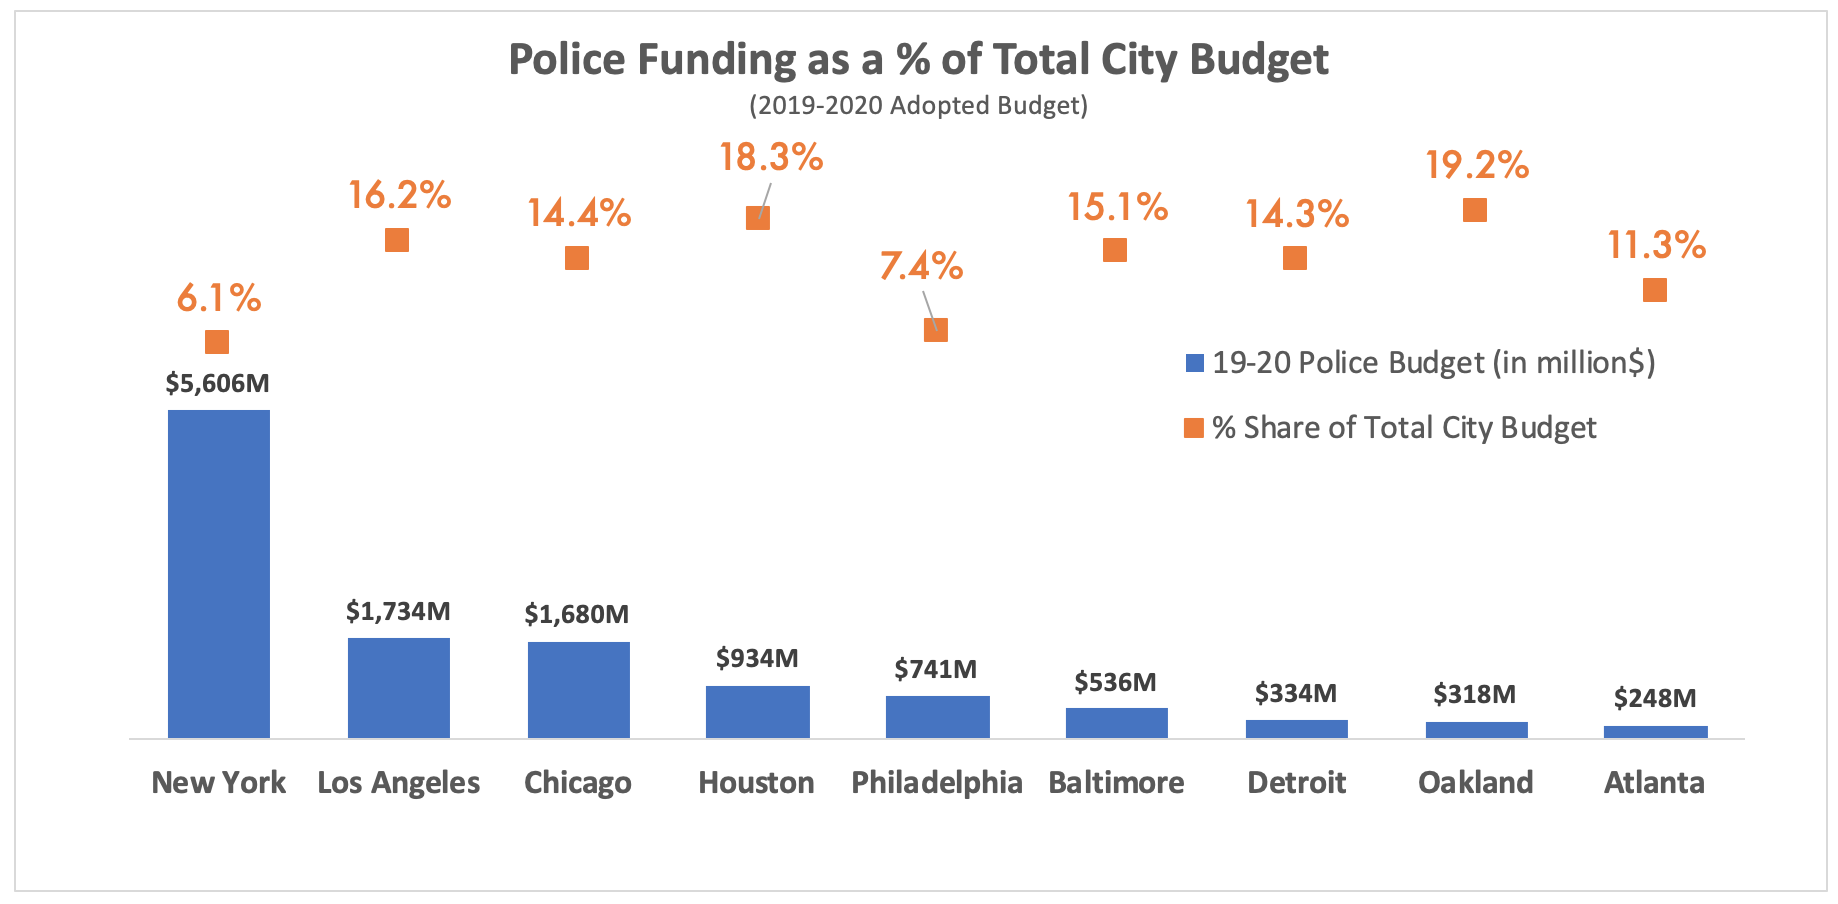  Source: data extracted from city government’s 2019-2020 adopted budgets. Links to each budget are attached at the bottom of this article. 